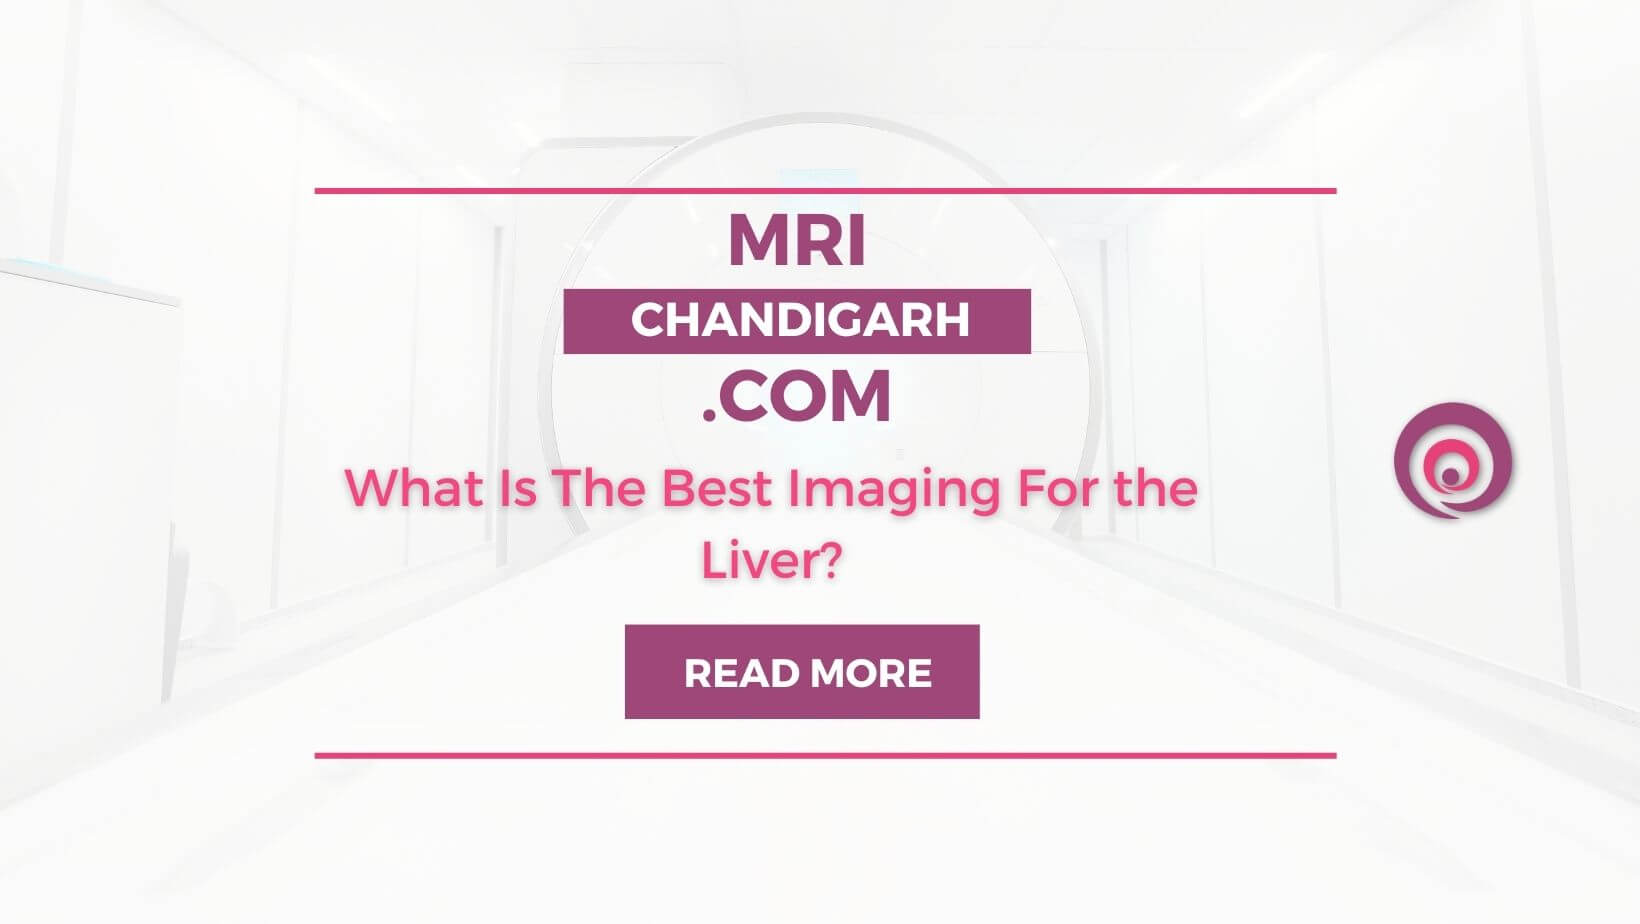 What Is The Best Imaging For the Liver?